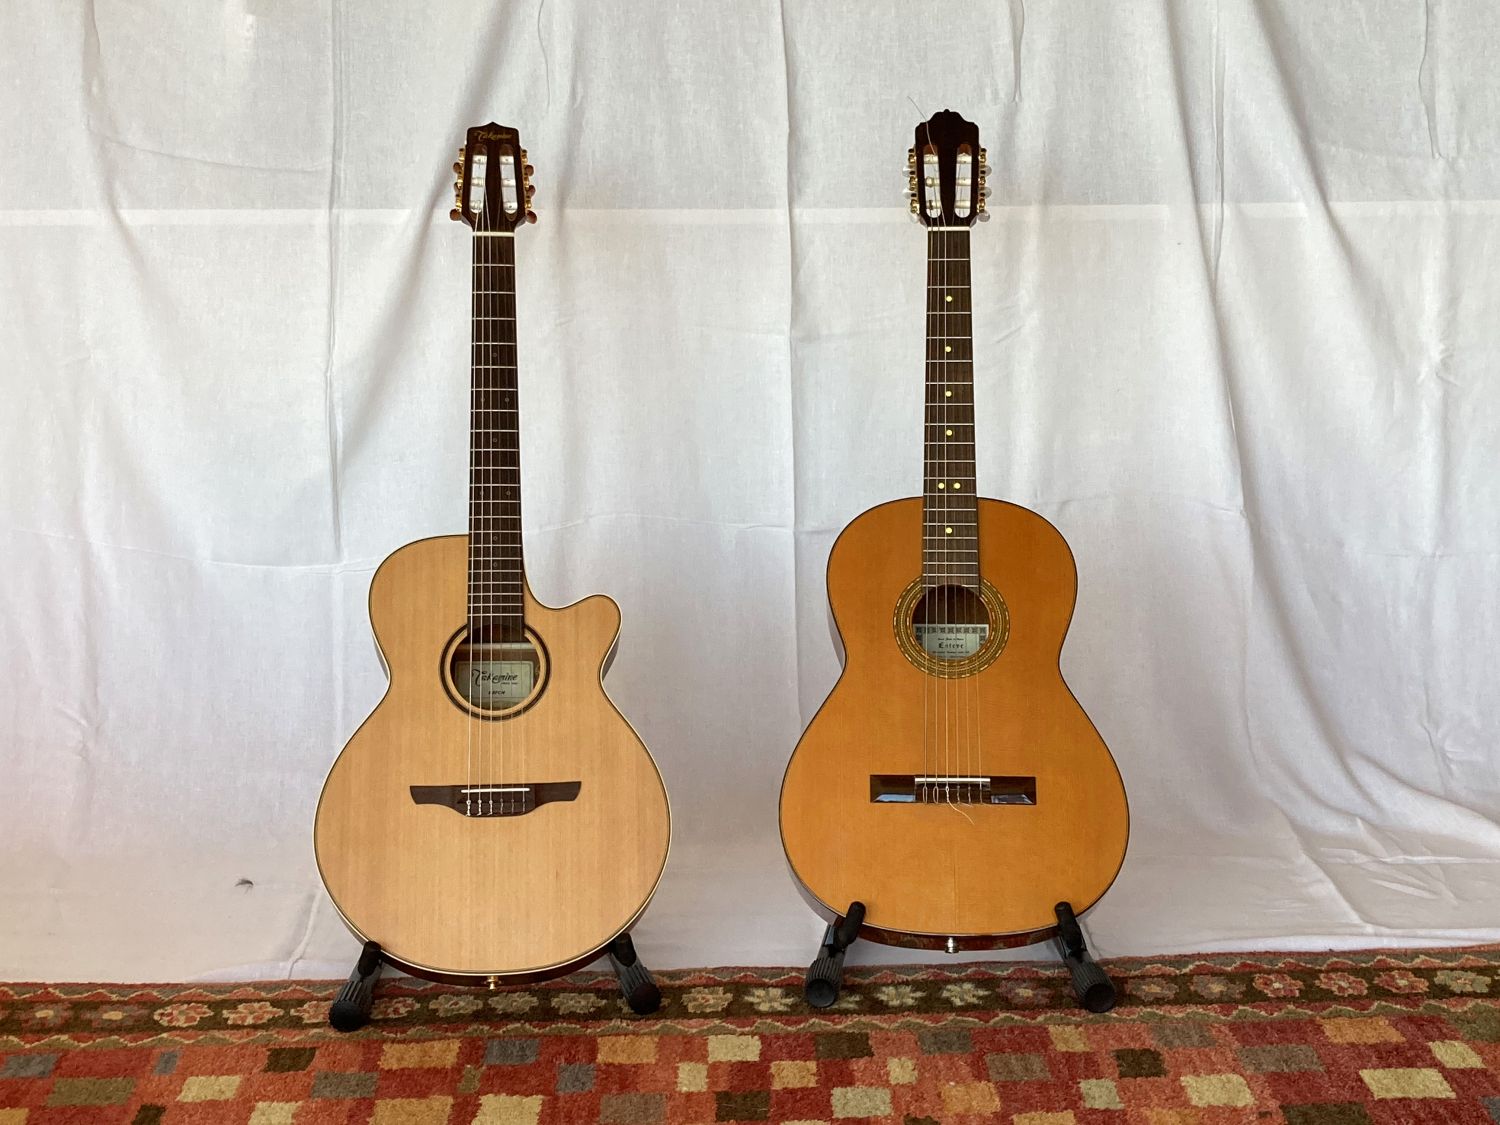 Nylon-String and Classical Guitars, Both With Pickups Installed